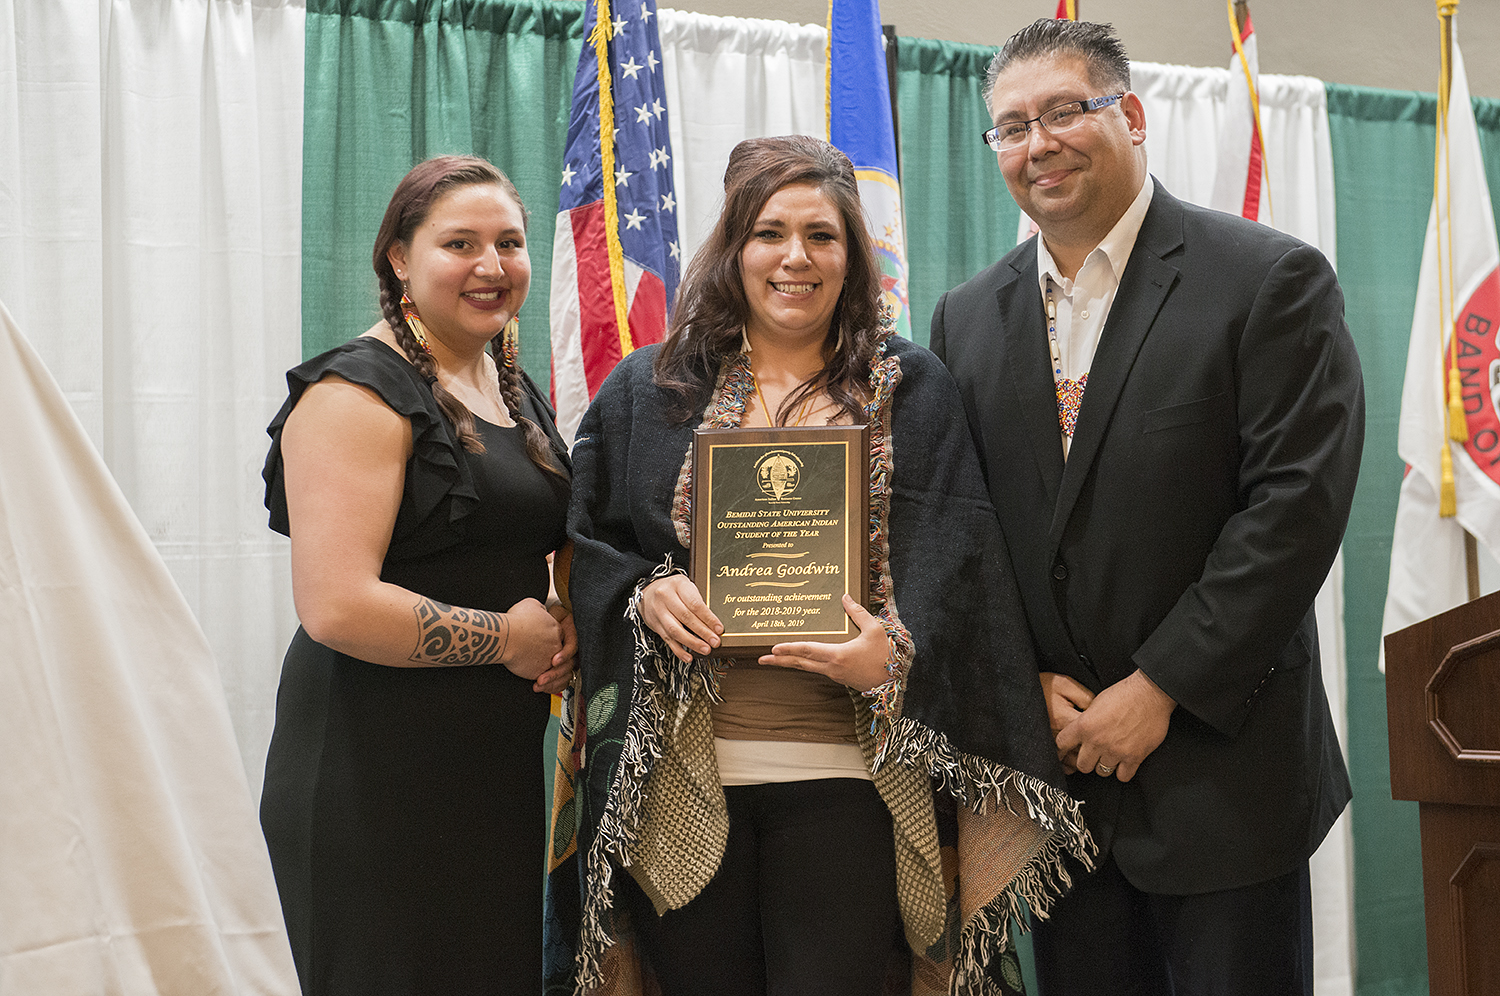 Andrea Goodwin, a senior from Red Lake, Minn. studying social work, was named the Outstanding American Indian Student of the Year.